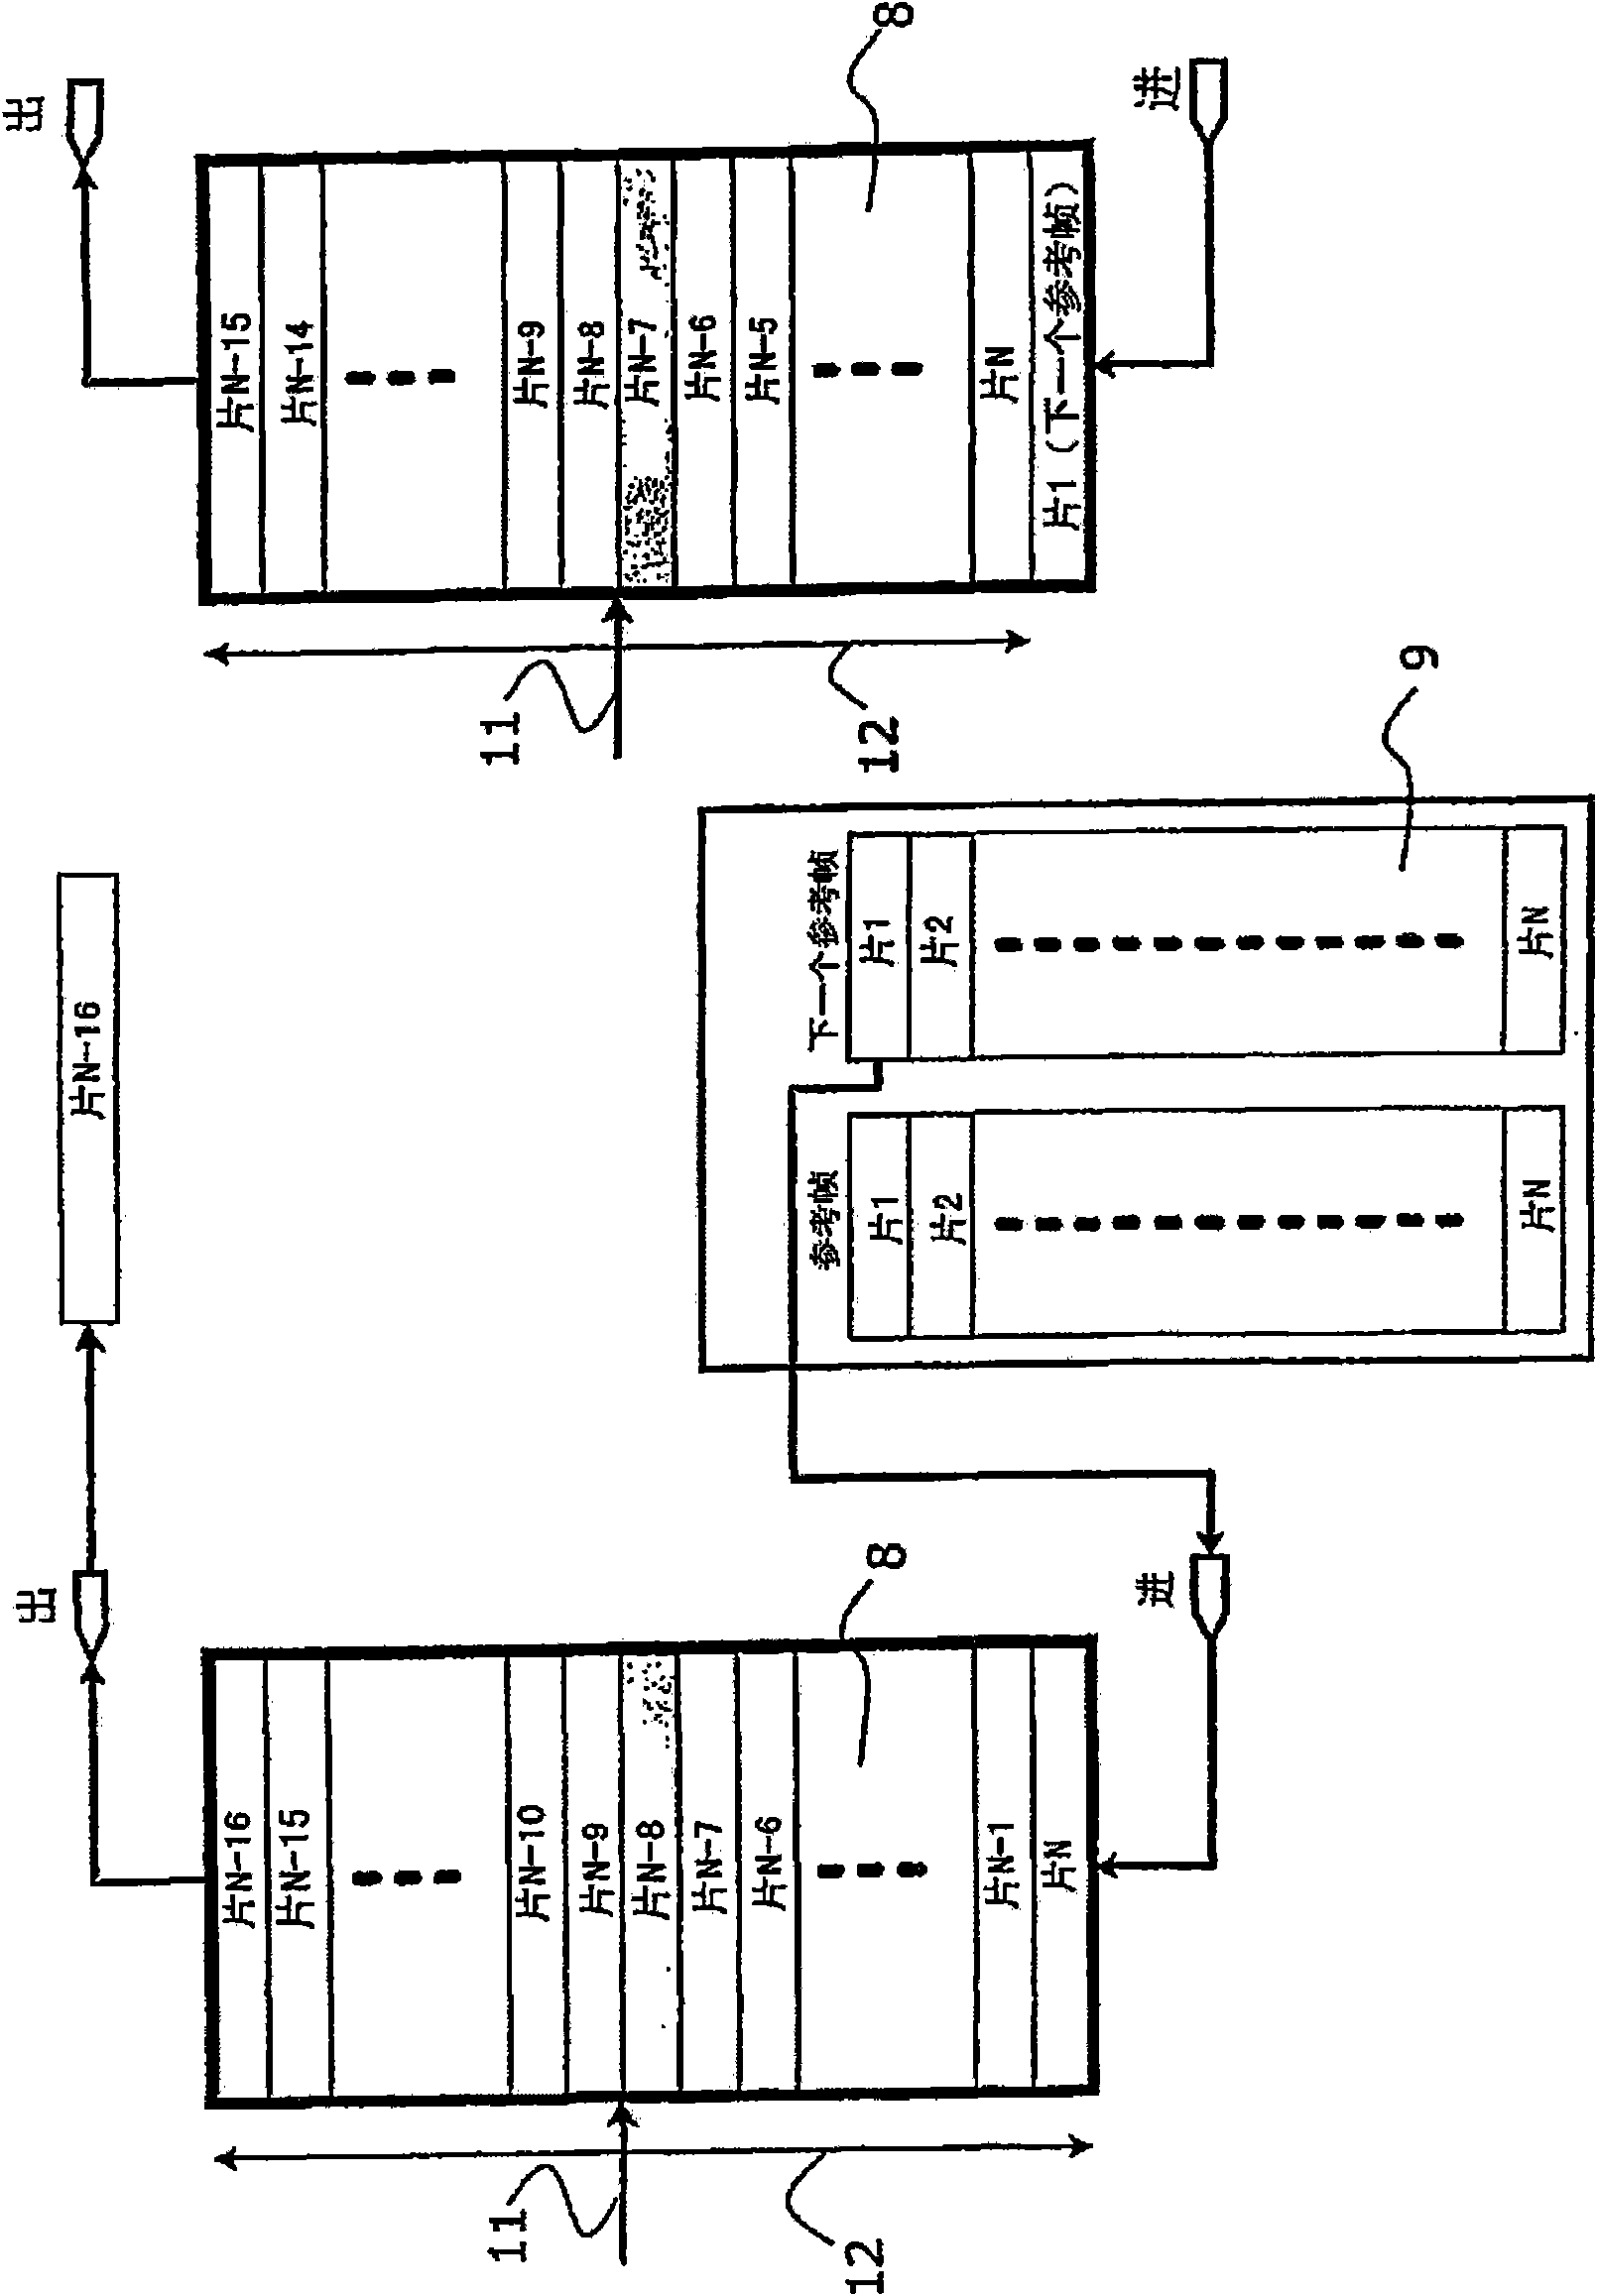 Video decoder with scalable compression and buffer for storing and retrieving reference frame data